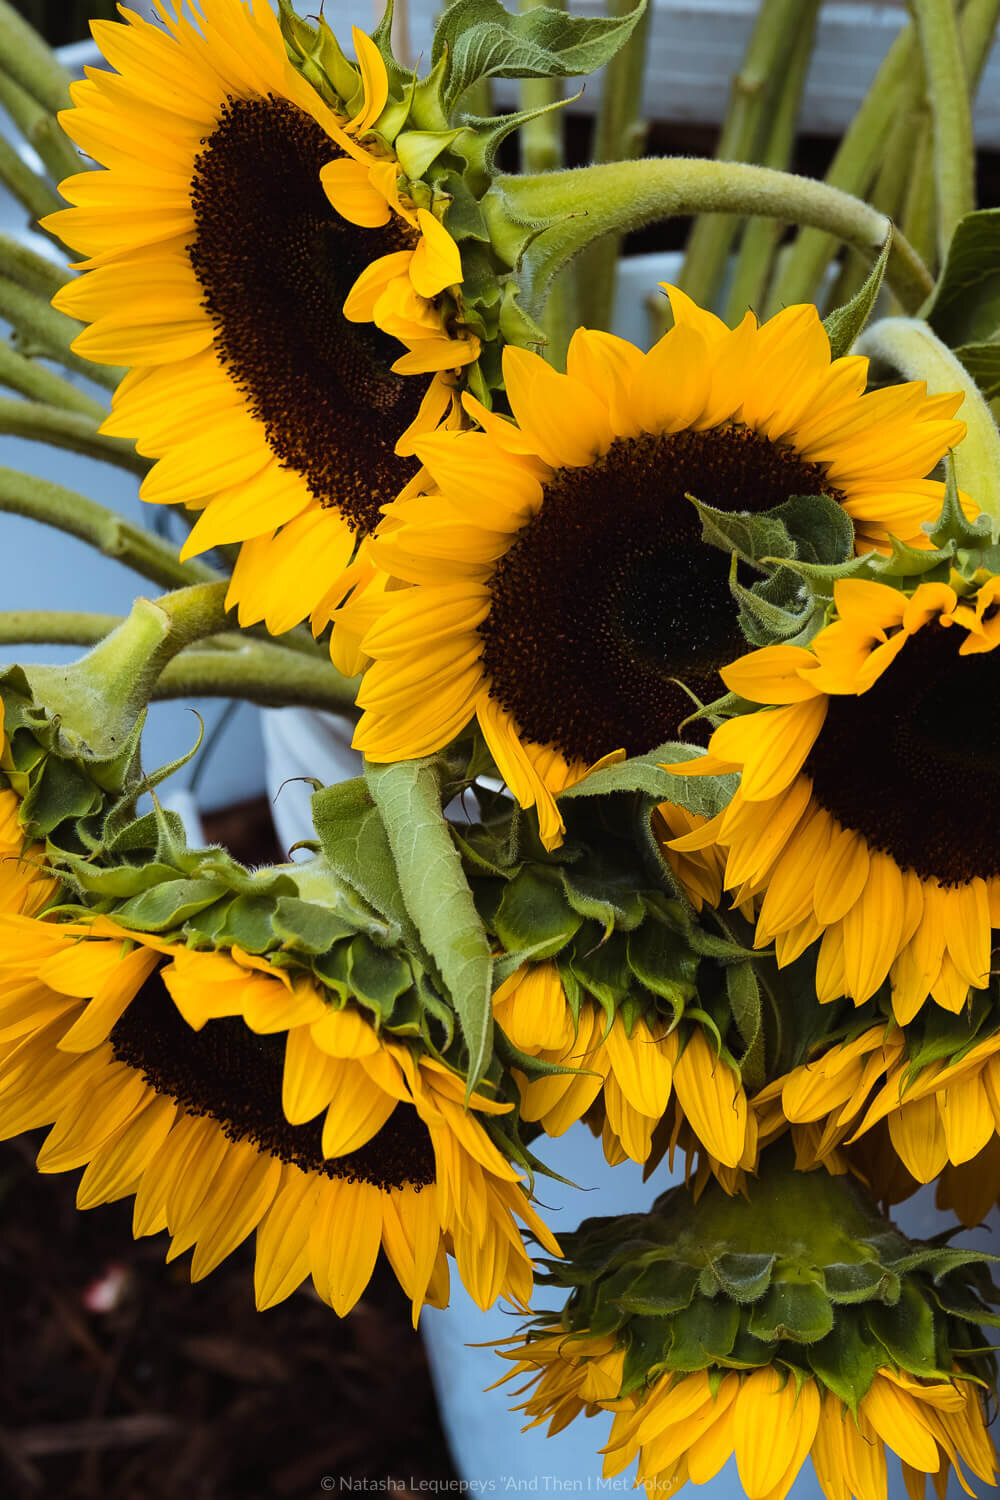 Sunflowers at the Logan Street Farmers Market, Chicago, USA. Travel photography and guide by © Natasha Lequepeys for "And Then I Met Yoko". #chicago #usa #travelblog #travelphotography